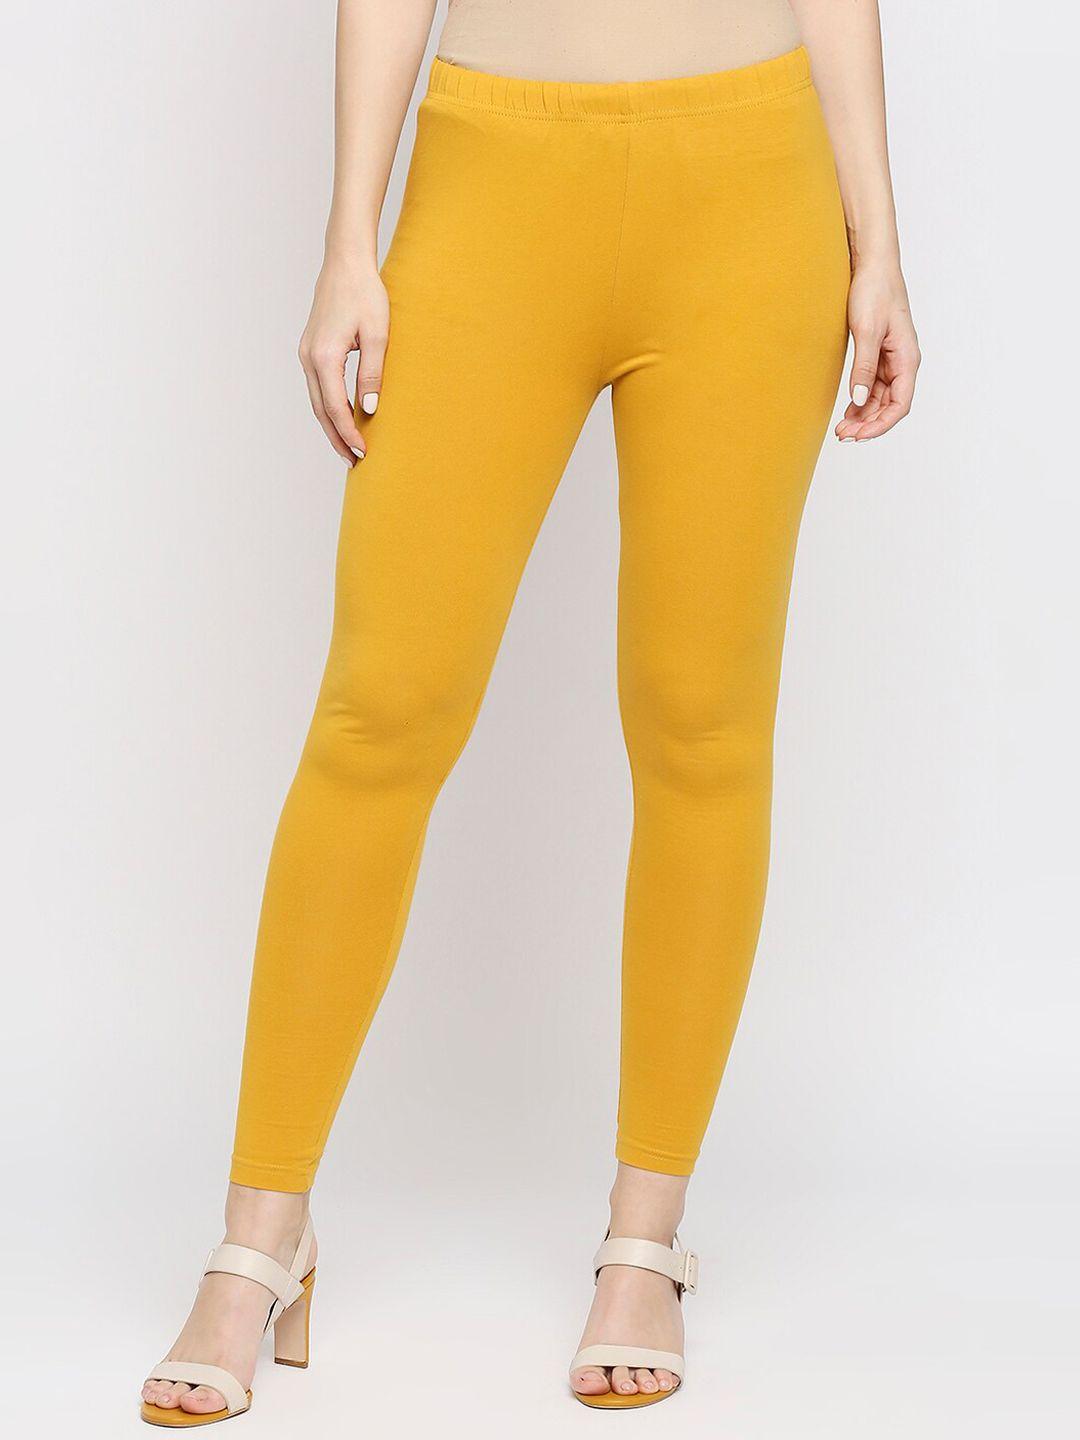 ethnicity-women-yellow-solid-cotton-ankle-length-leggings